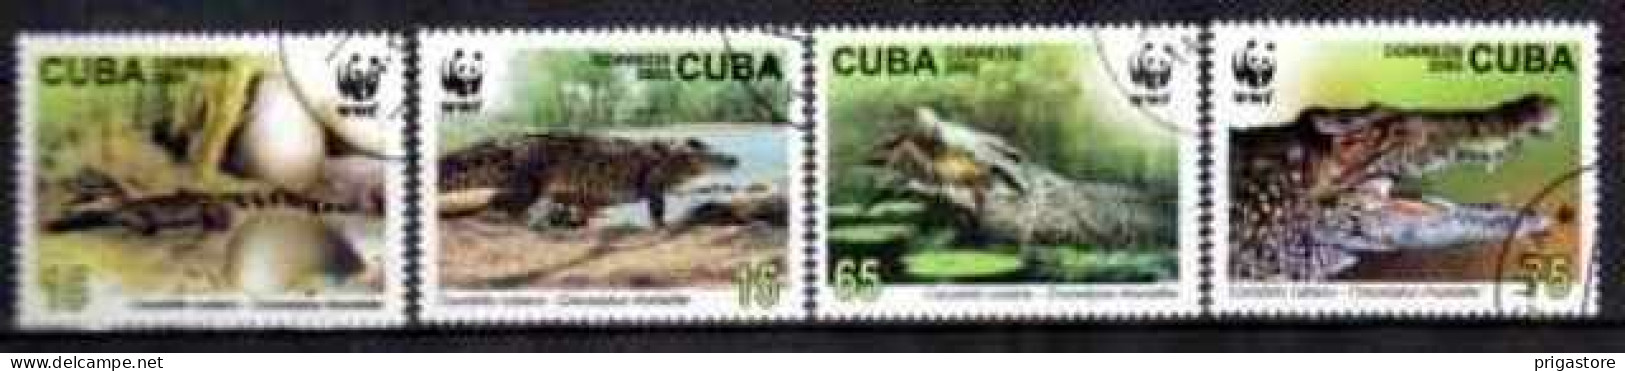 Cuba 2003 Animaux Crocodiles (19) Yvert N° 4117 à 4120 Oblitéré Used - Used Stamps